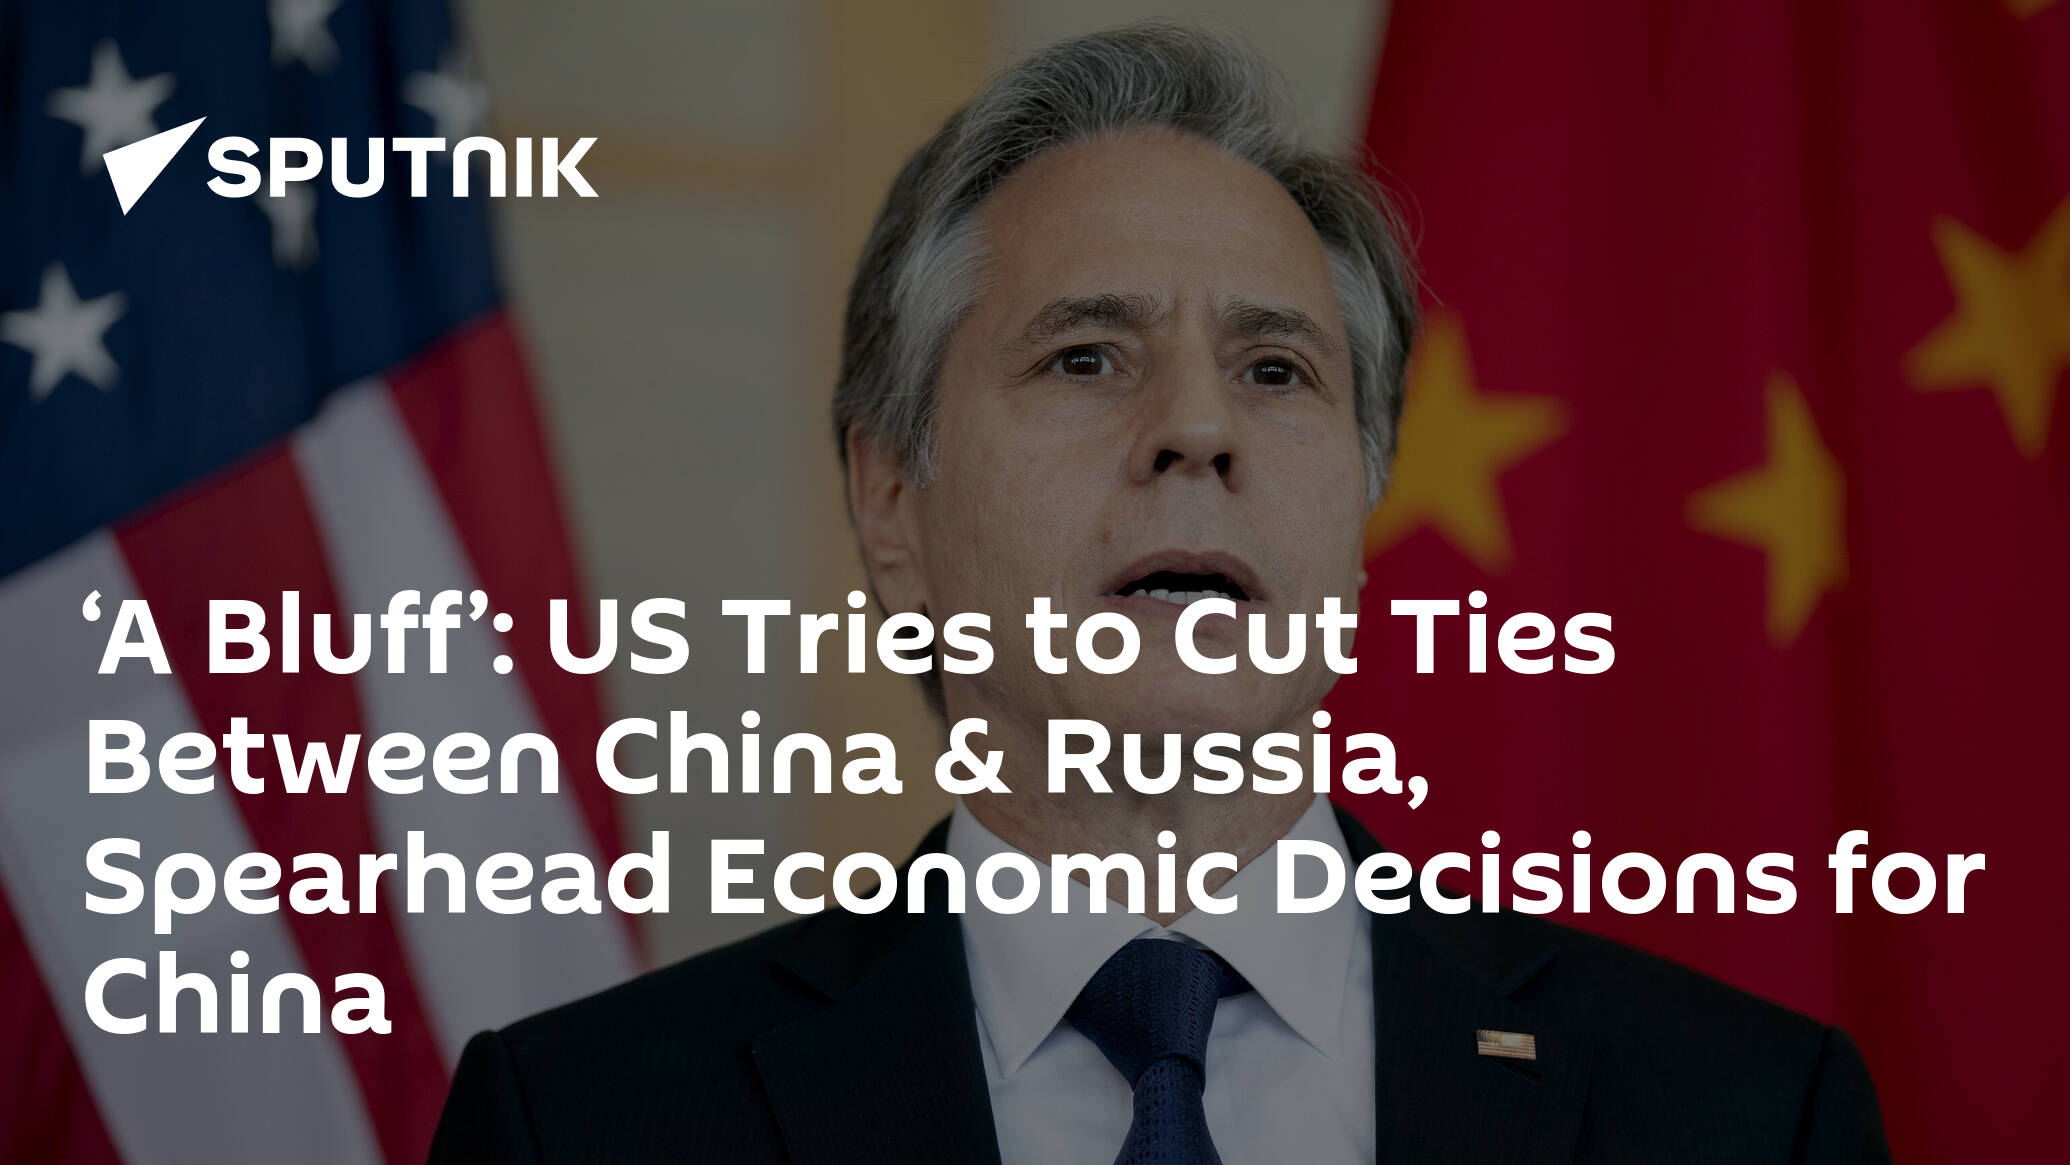 ‘A Bluff’: US Tries to Cut Ties Between China & Russia, Spearhead Economic Decisions for China